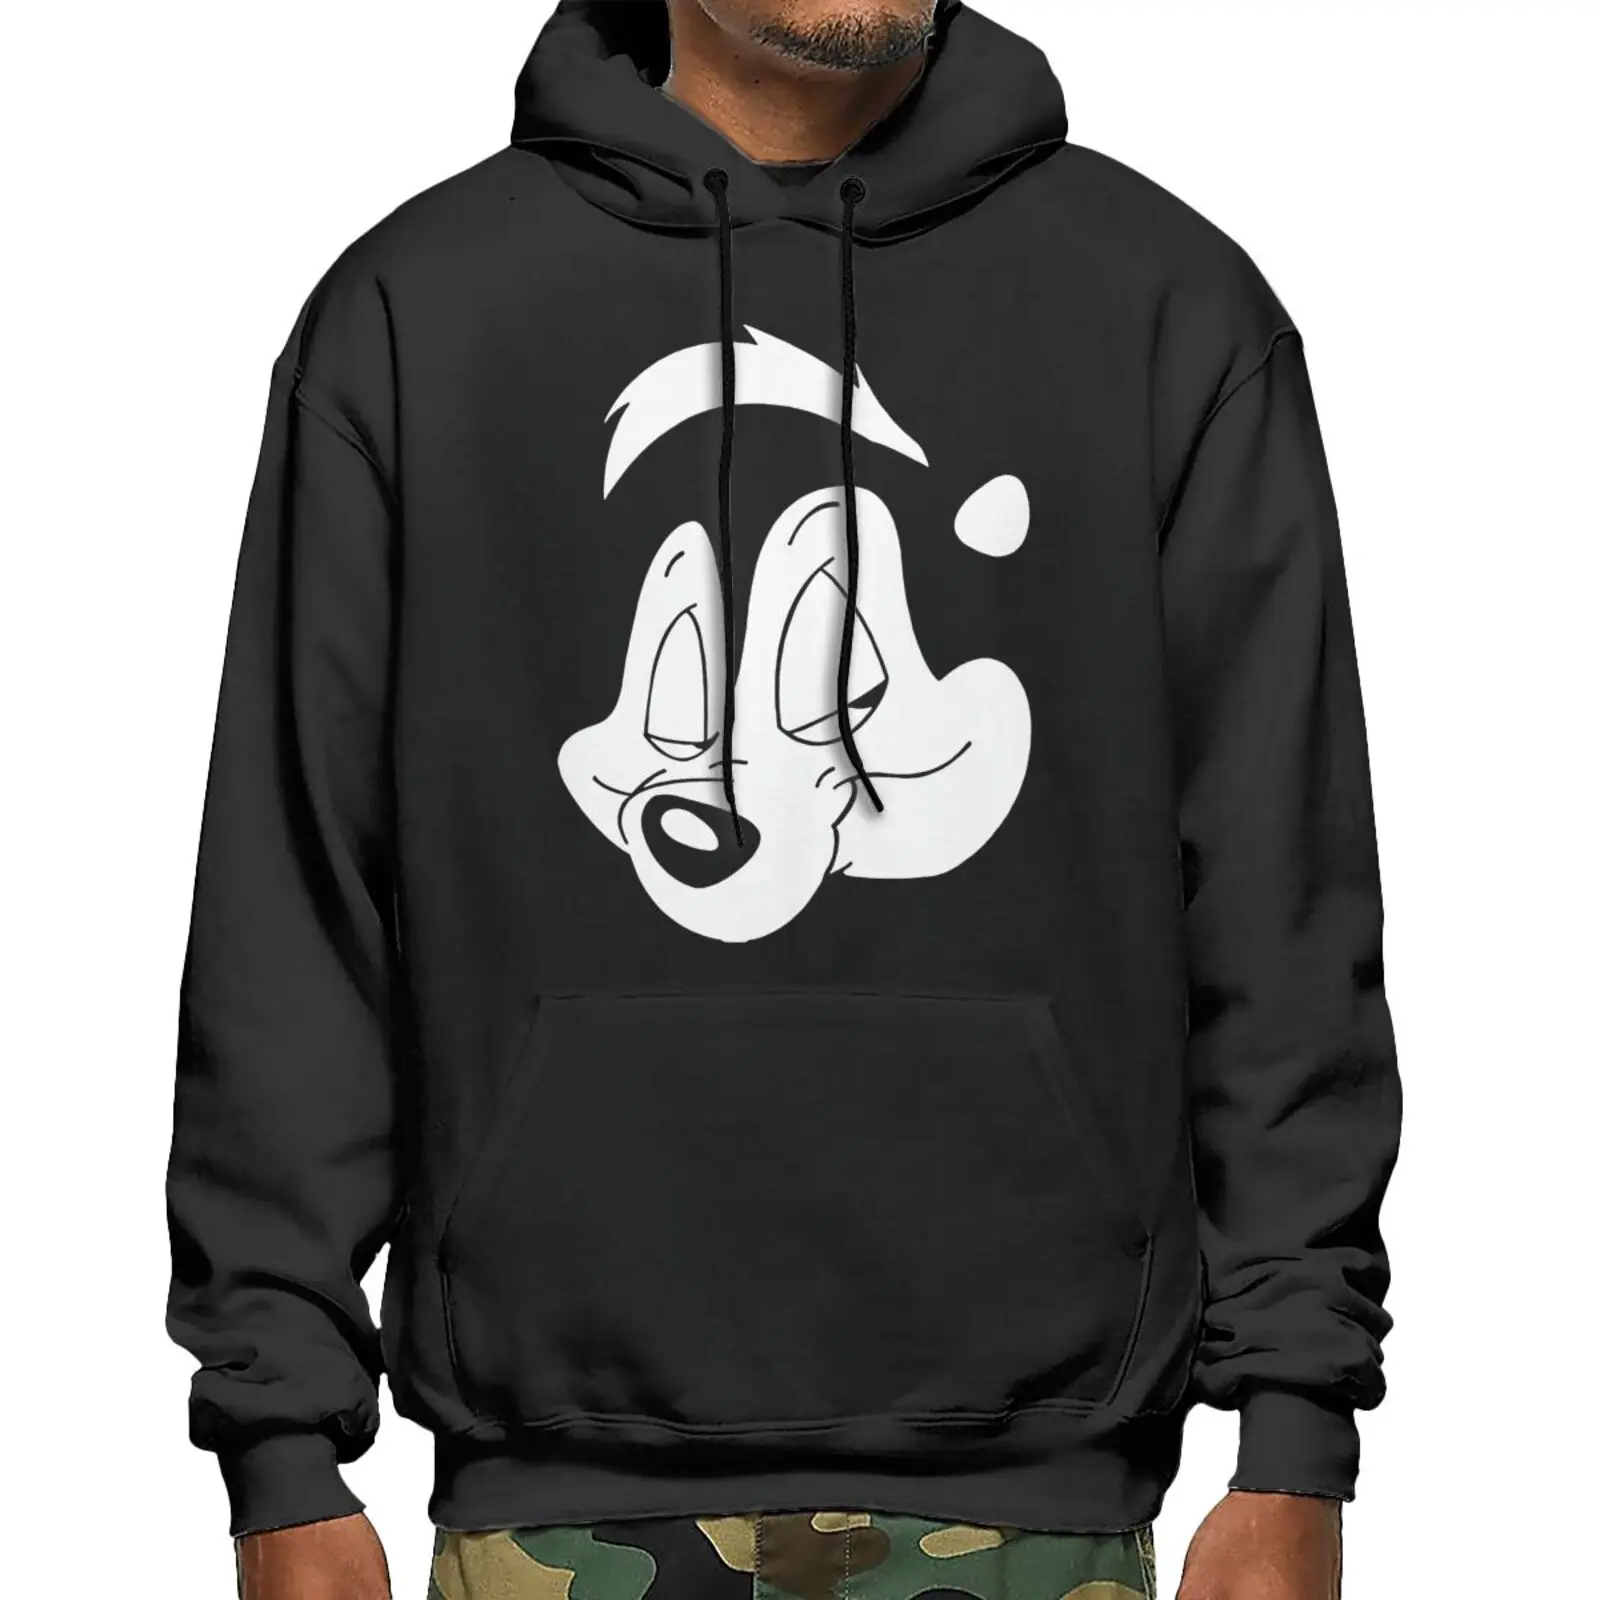 

Item Pepe Le Pew Worn By Sweatshirts Hoodies Men Sweetshirts Men's Hoodies Sweatshirts For Men Sweatshirt Anime Gothic Clothes